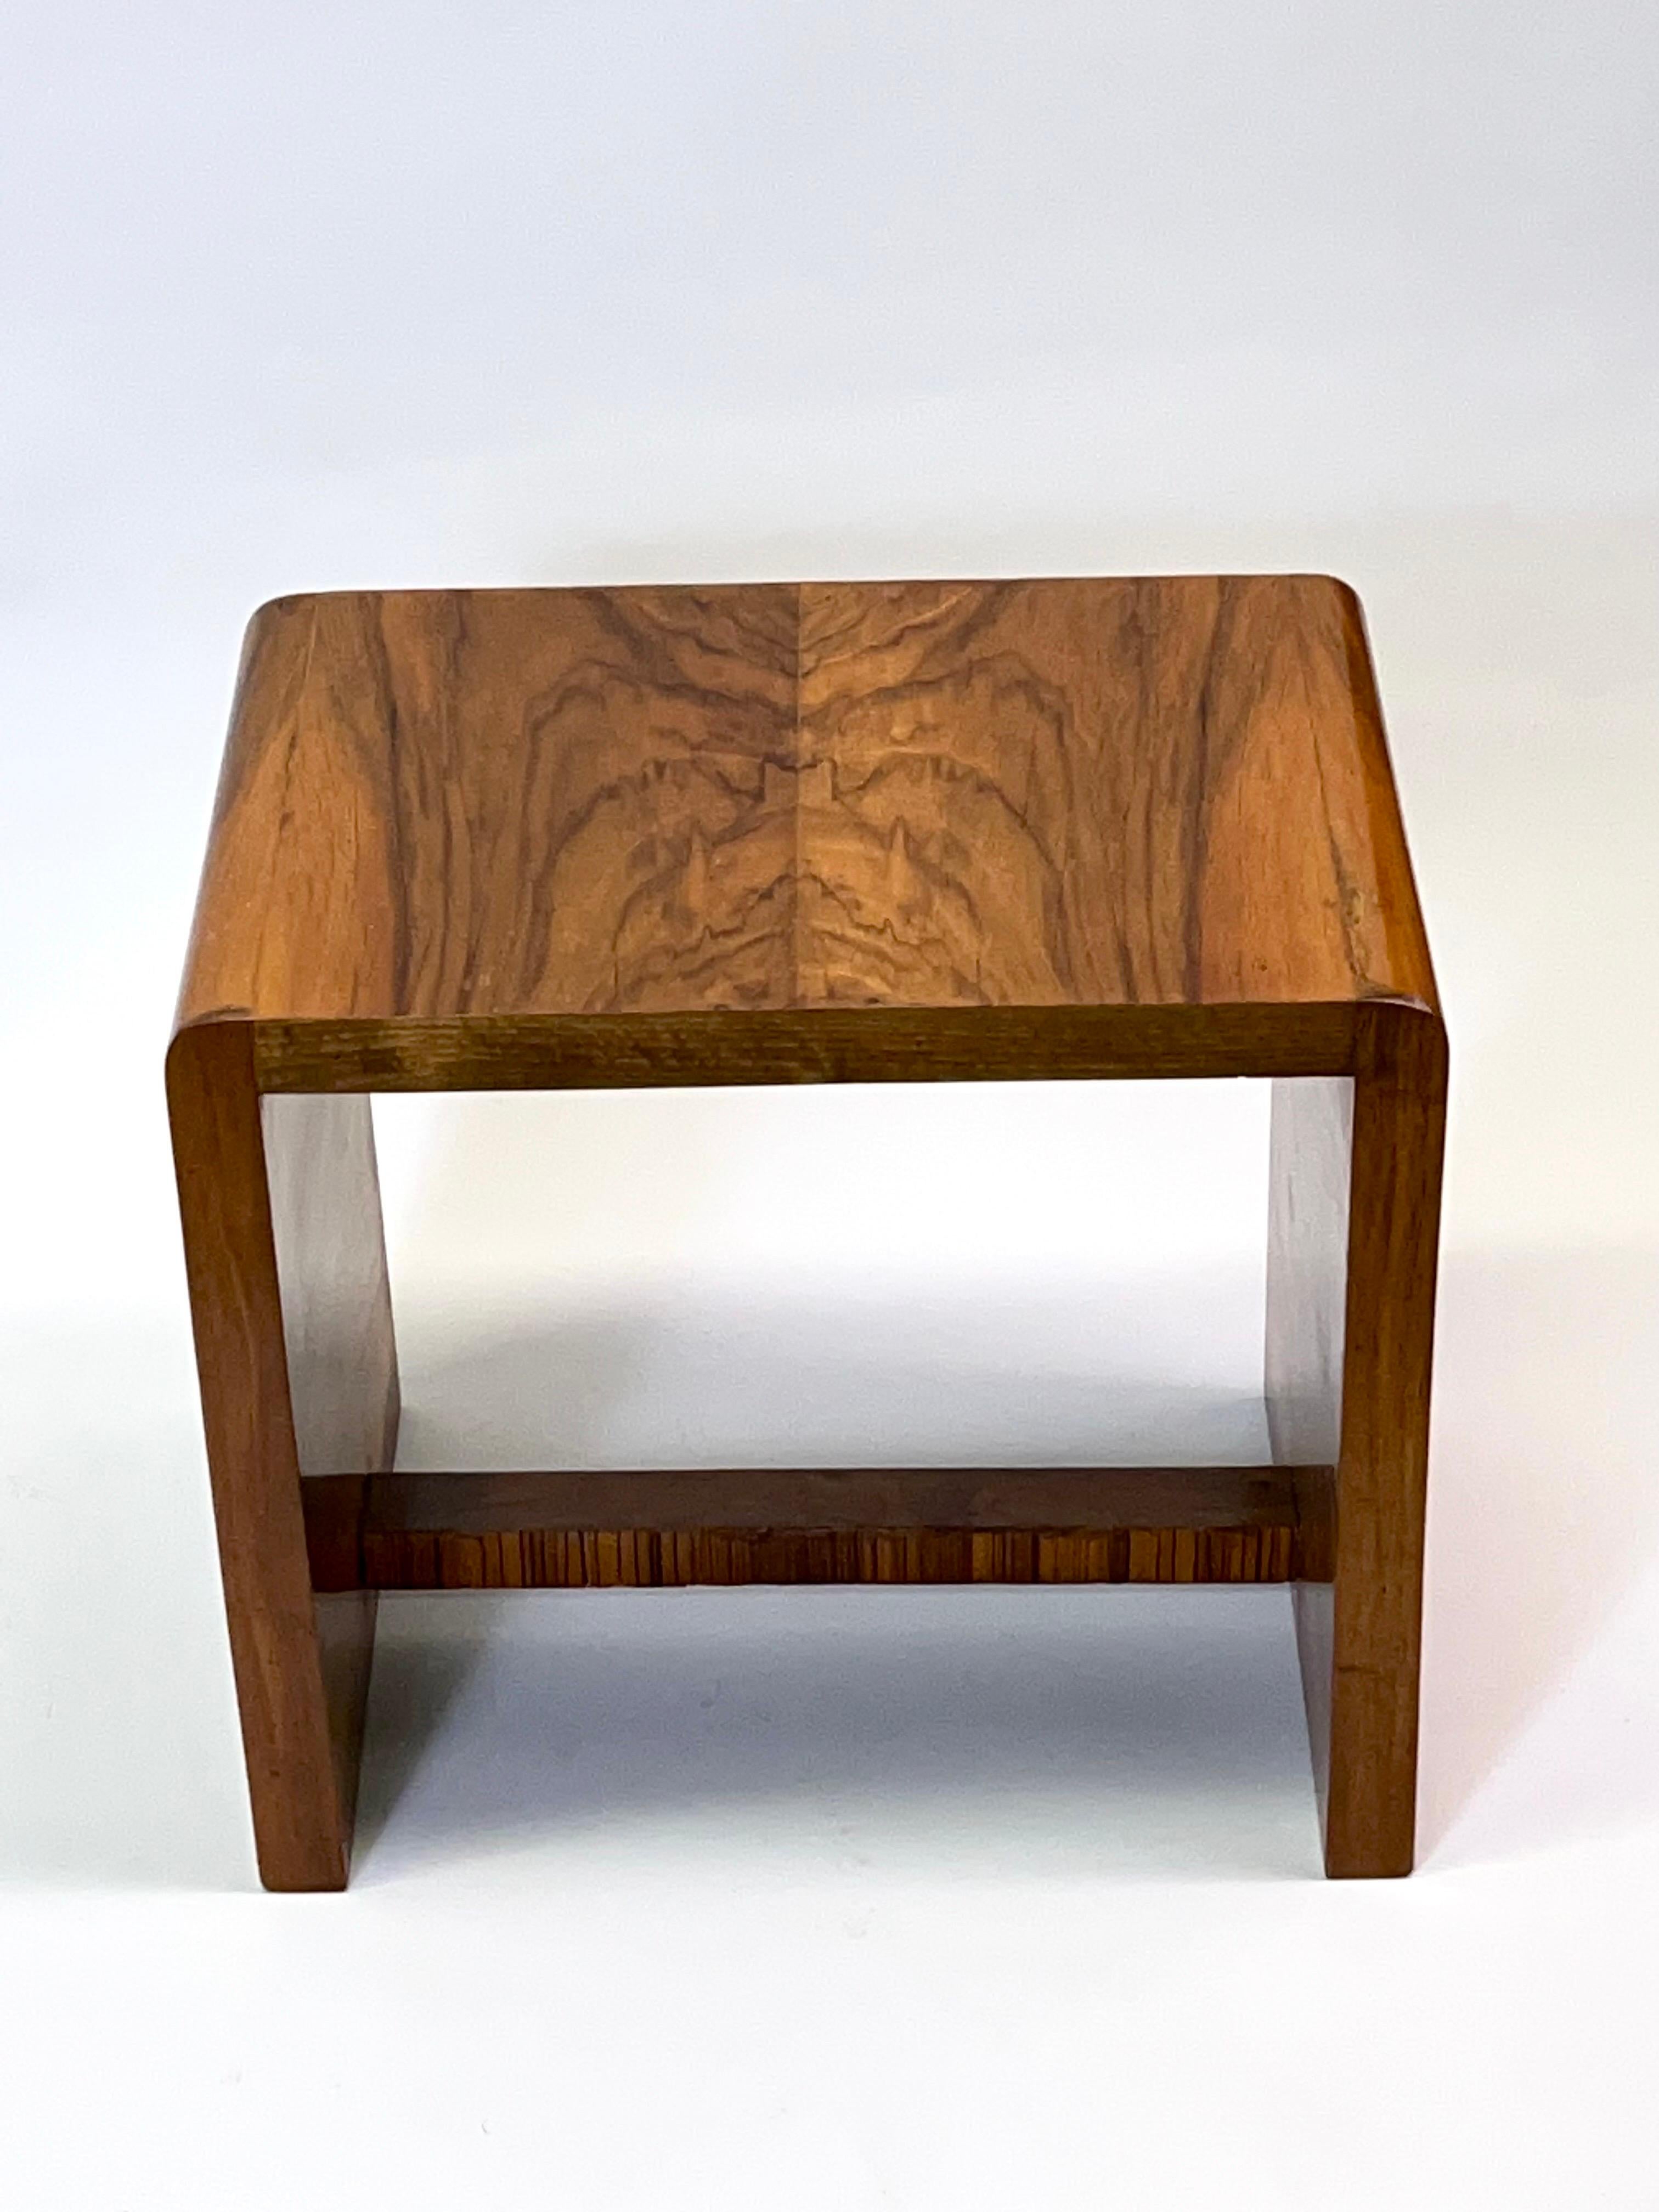 Pair Italian Mid-century Modern Rationalist Elm Wood Benches, Giuseppe Pagano  For Sale 5